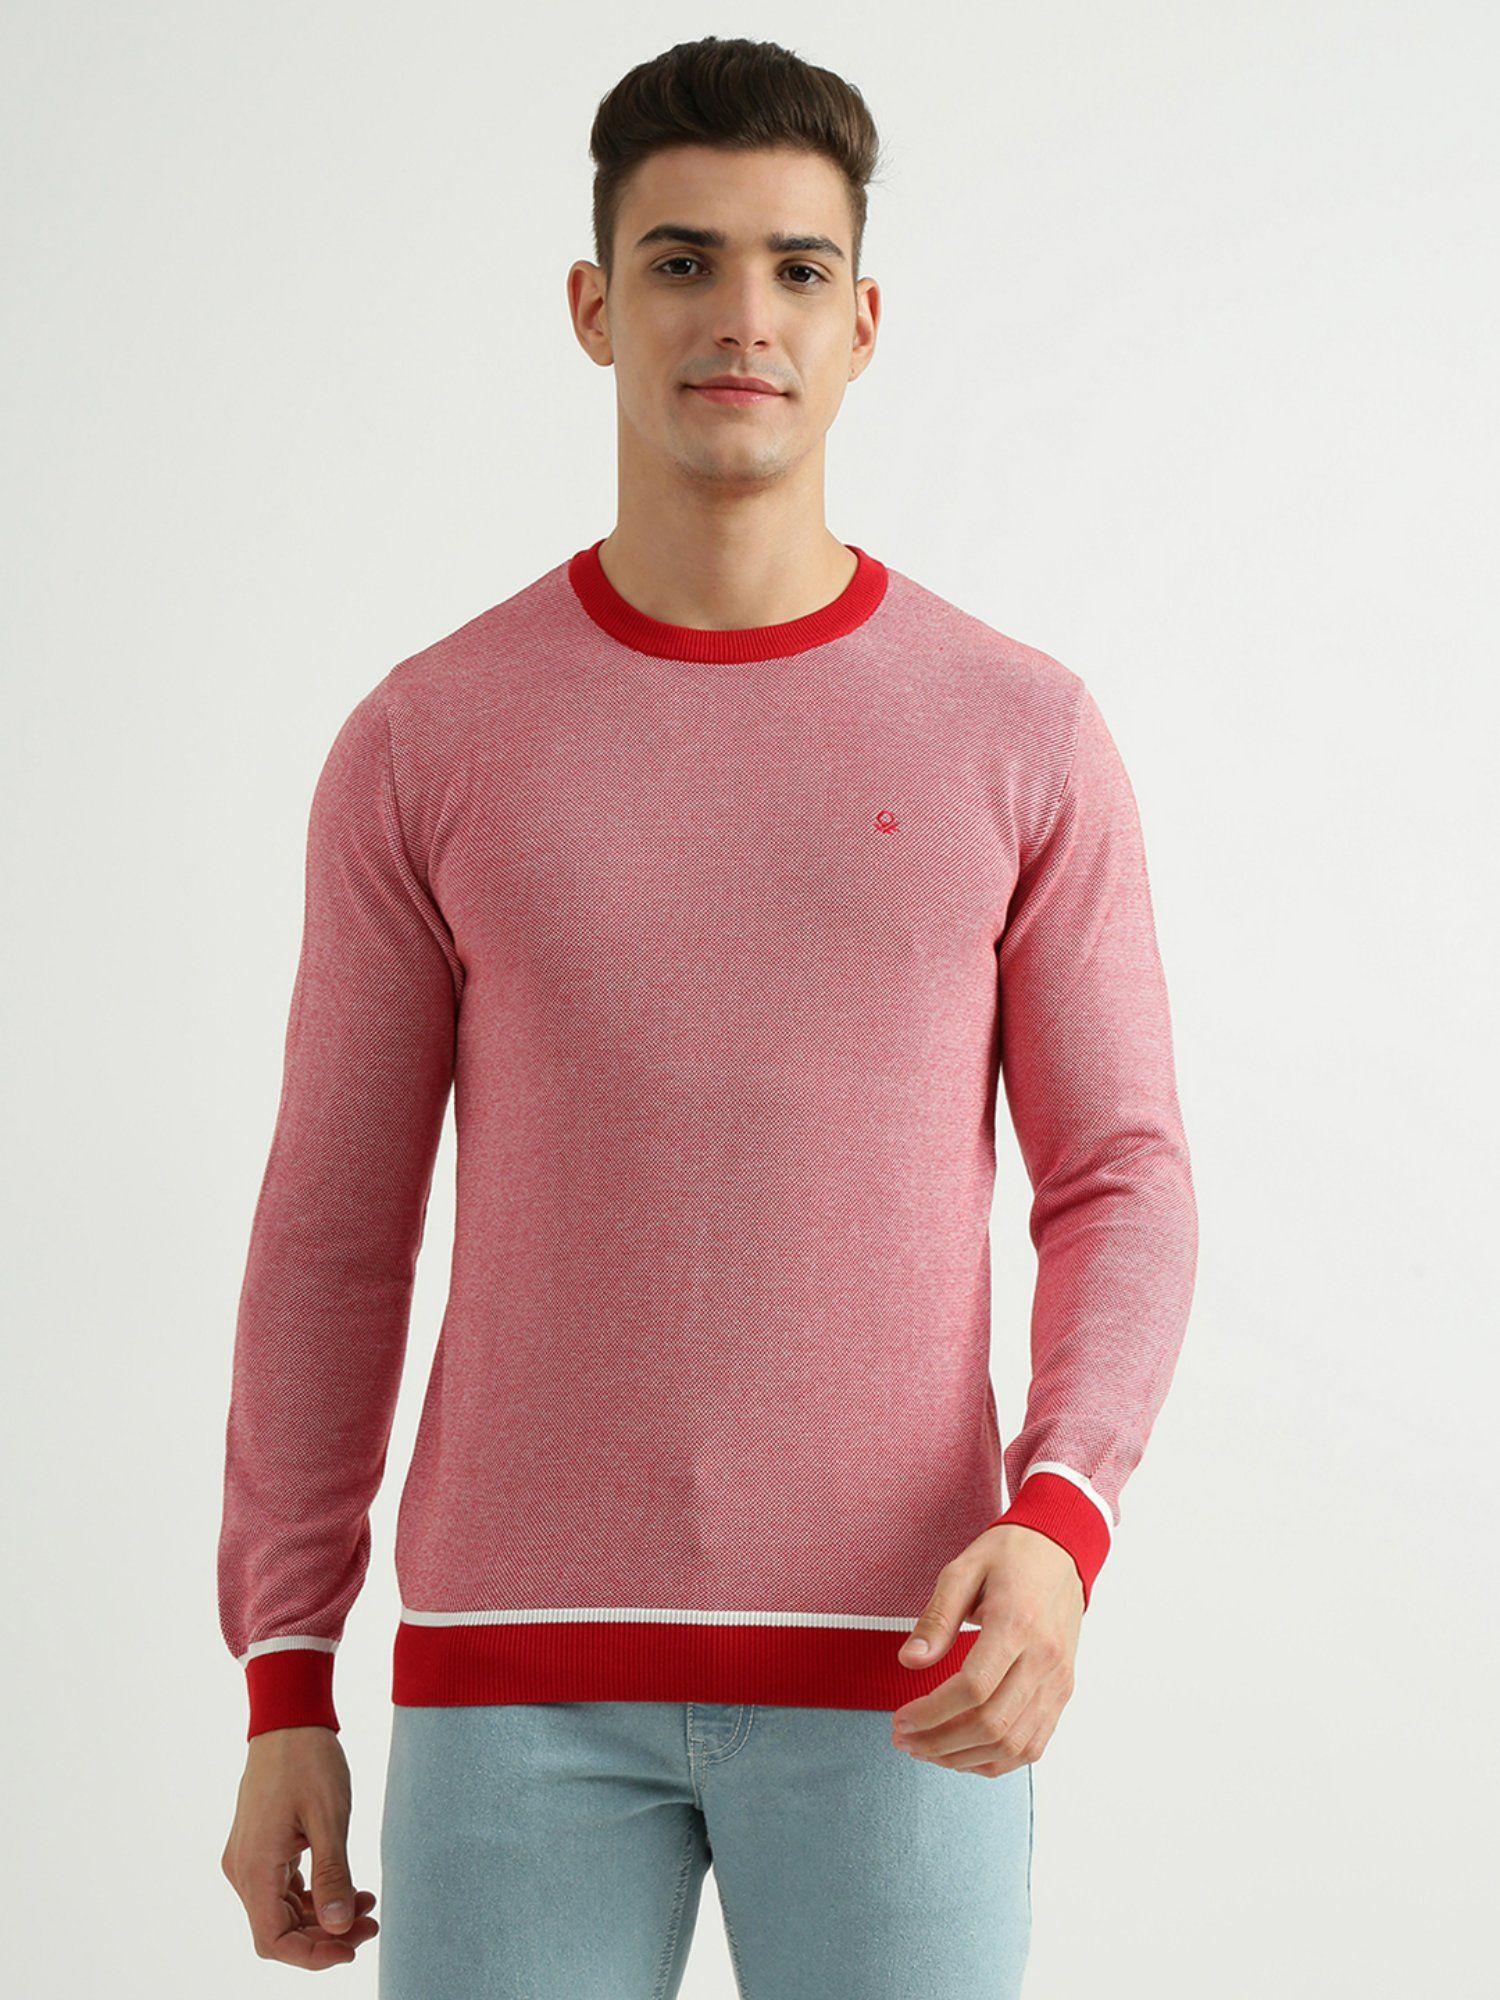 Mens Long Sleeve Sweater-Pink